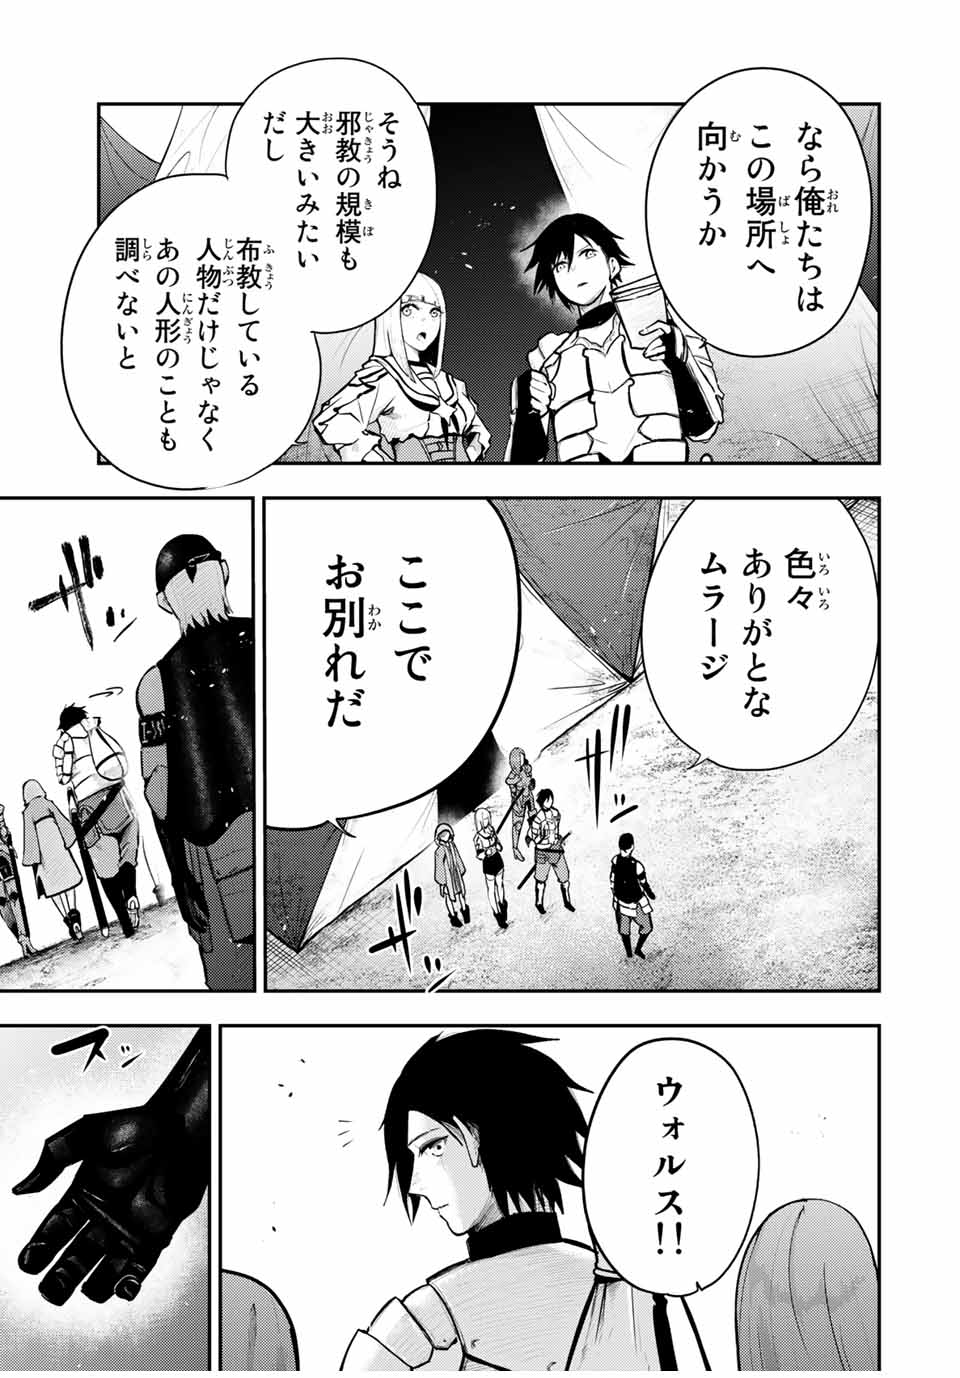 the strongest former prince-; 奴隷転生 ～その奴隷、最強の元王子につき～ 第32話 - Page 9